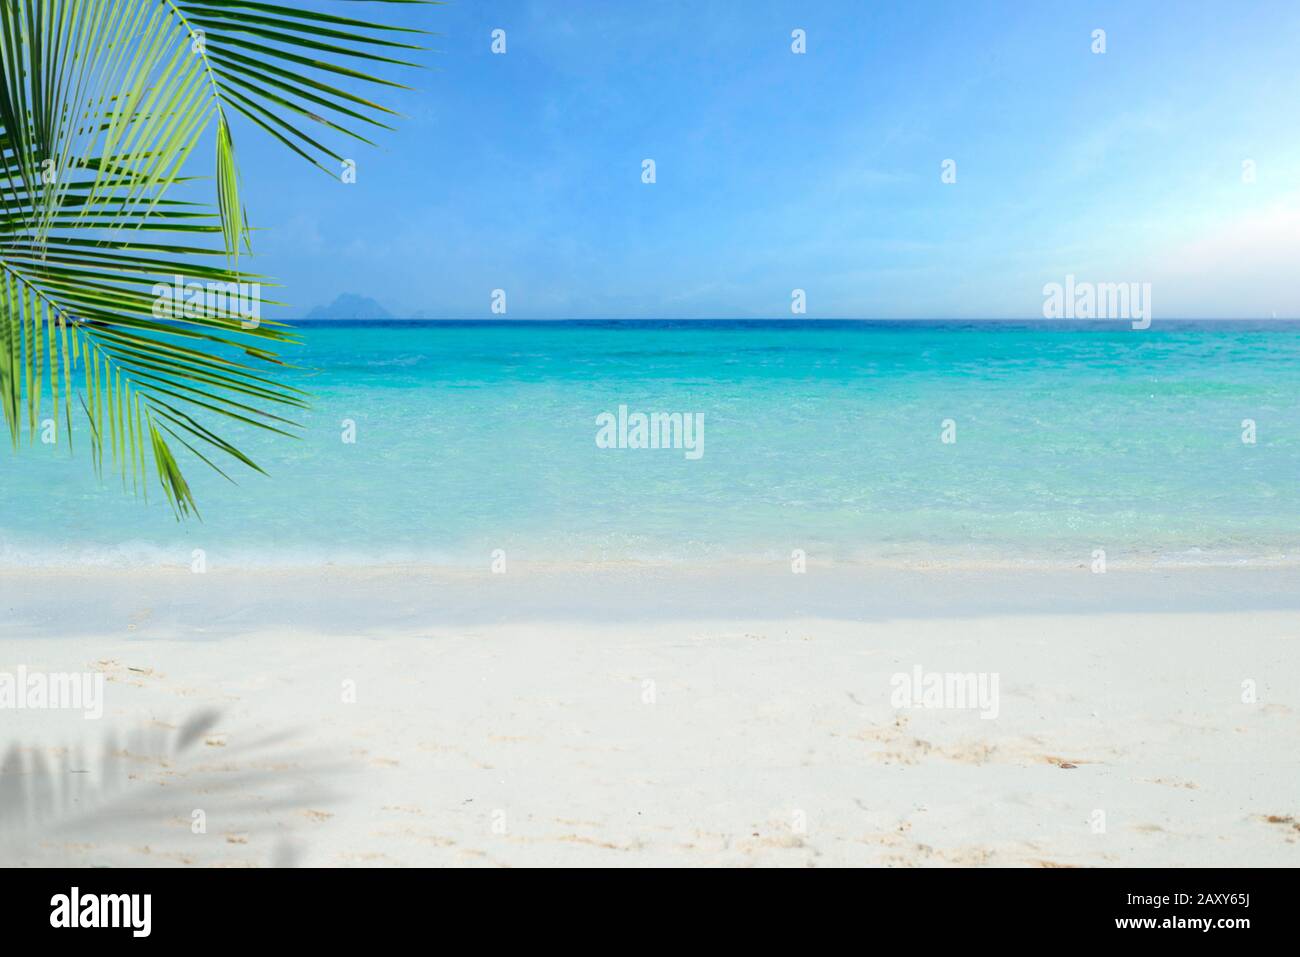 Tropical beach with coconut palm, sea and sand, summer holiday background. Travel and beach vacation, free space for text. Stock Photo